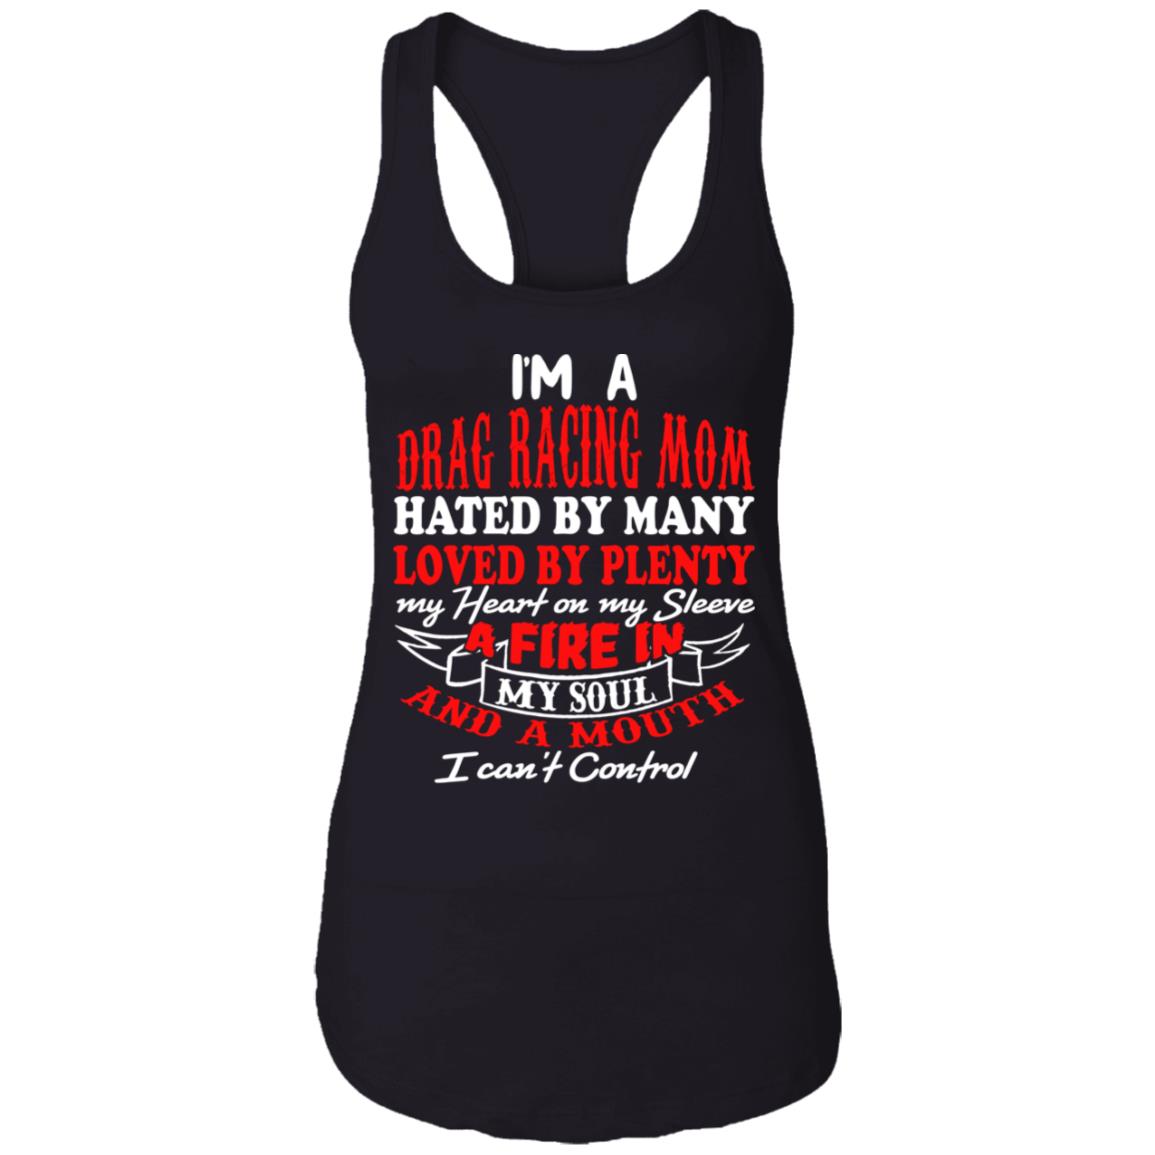 I'm A Drag Racing Mom Hated By Many Loved By Plenty Ladies Ideal Racerback Tank